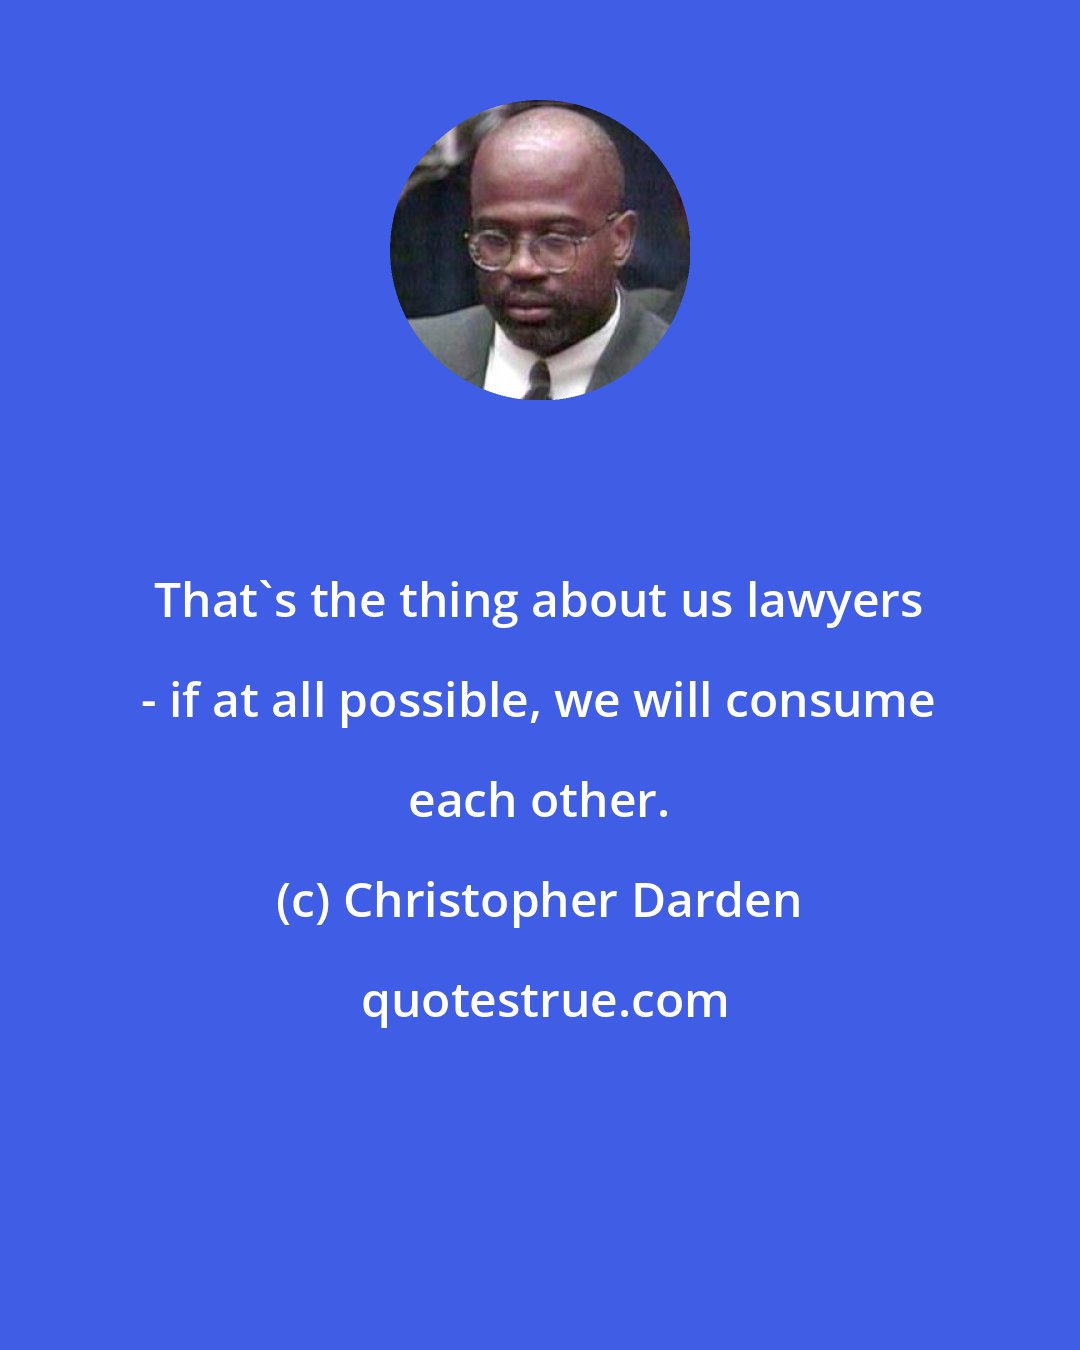 Christopher Darden: That's the thing about us lawyers - if at all possible, we will consume each other.